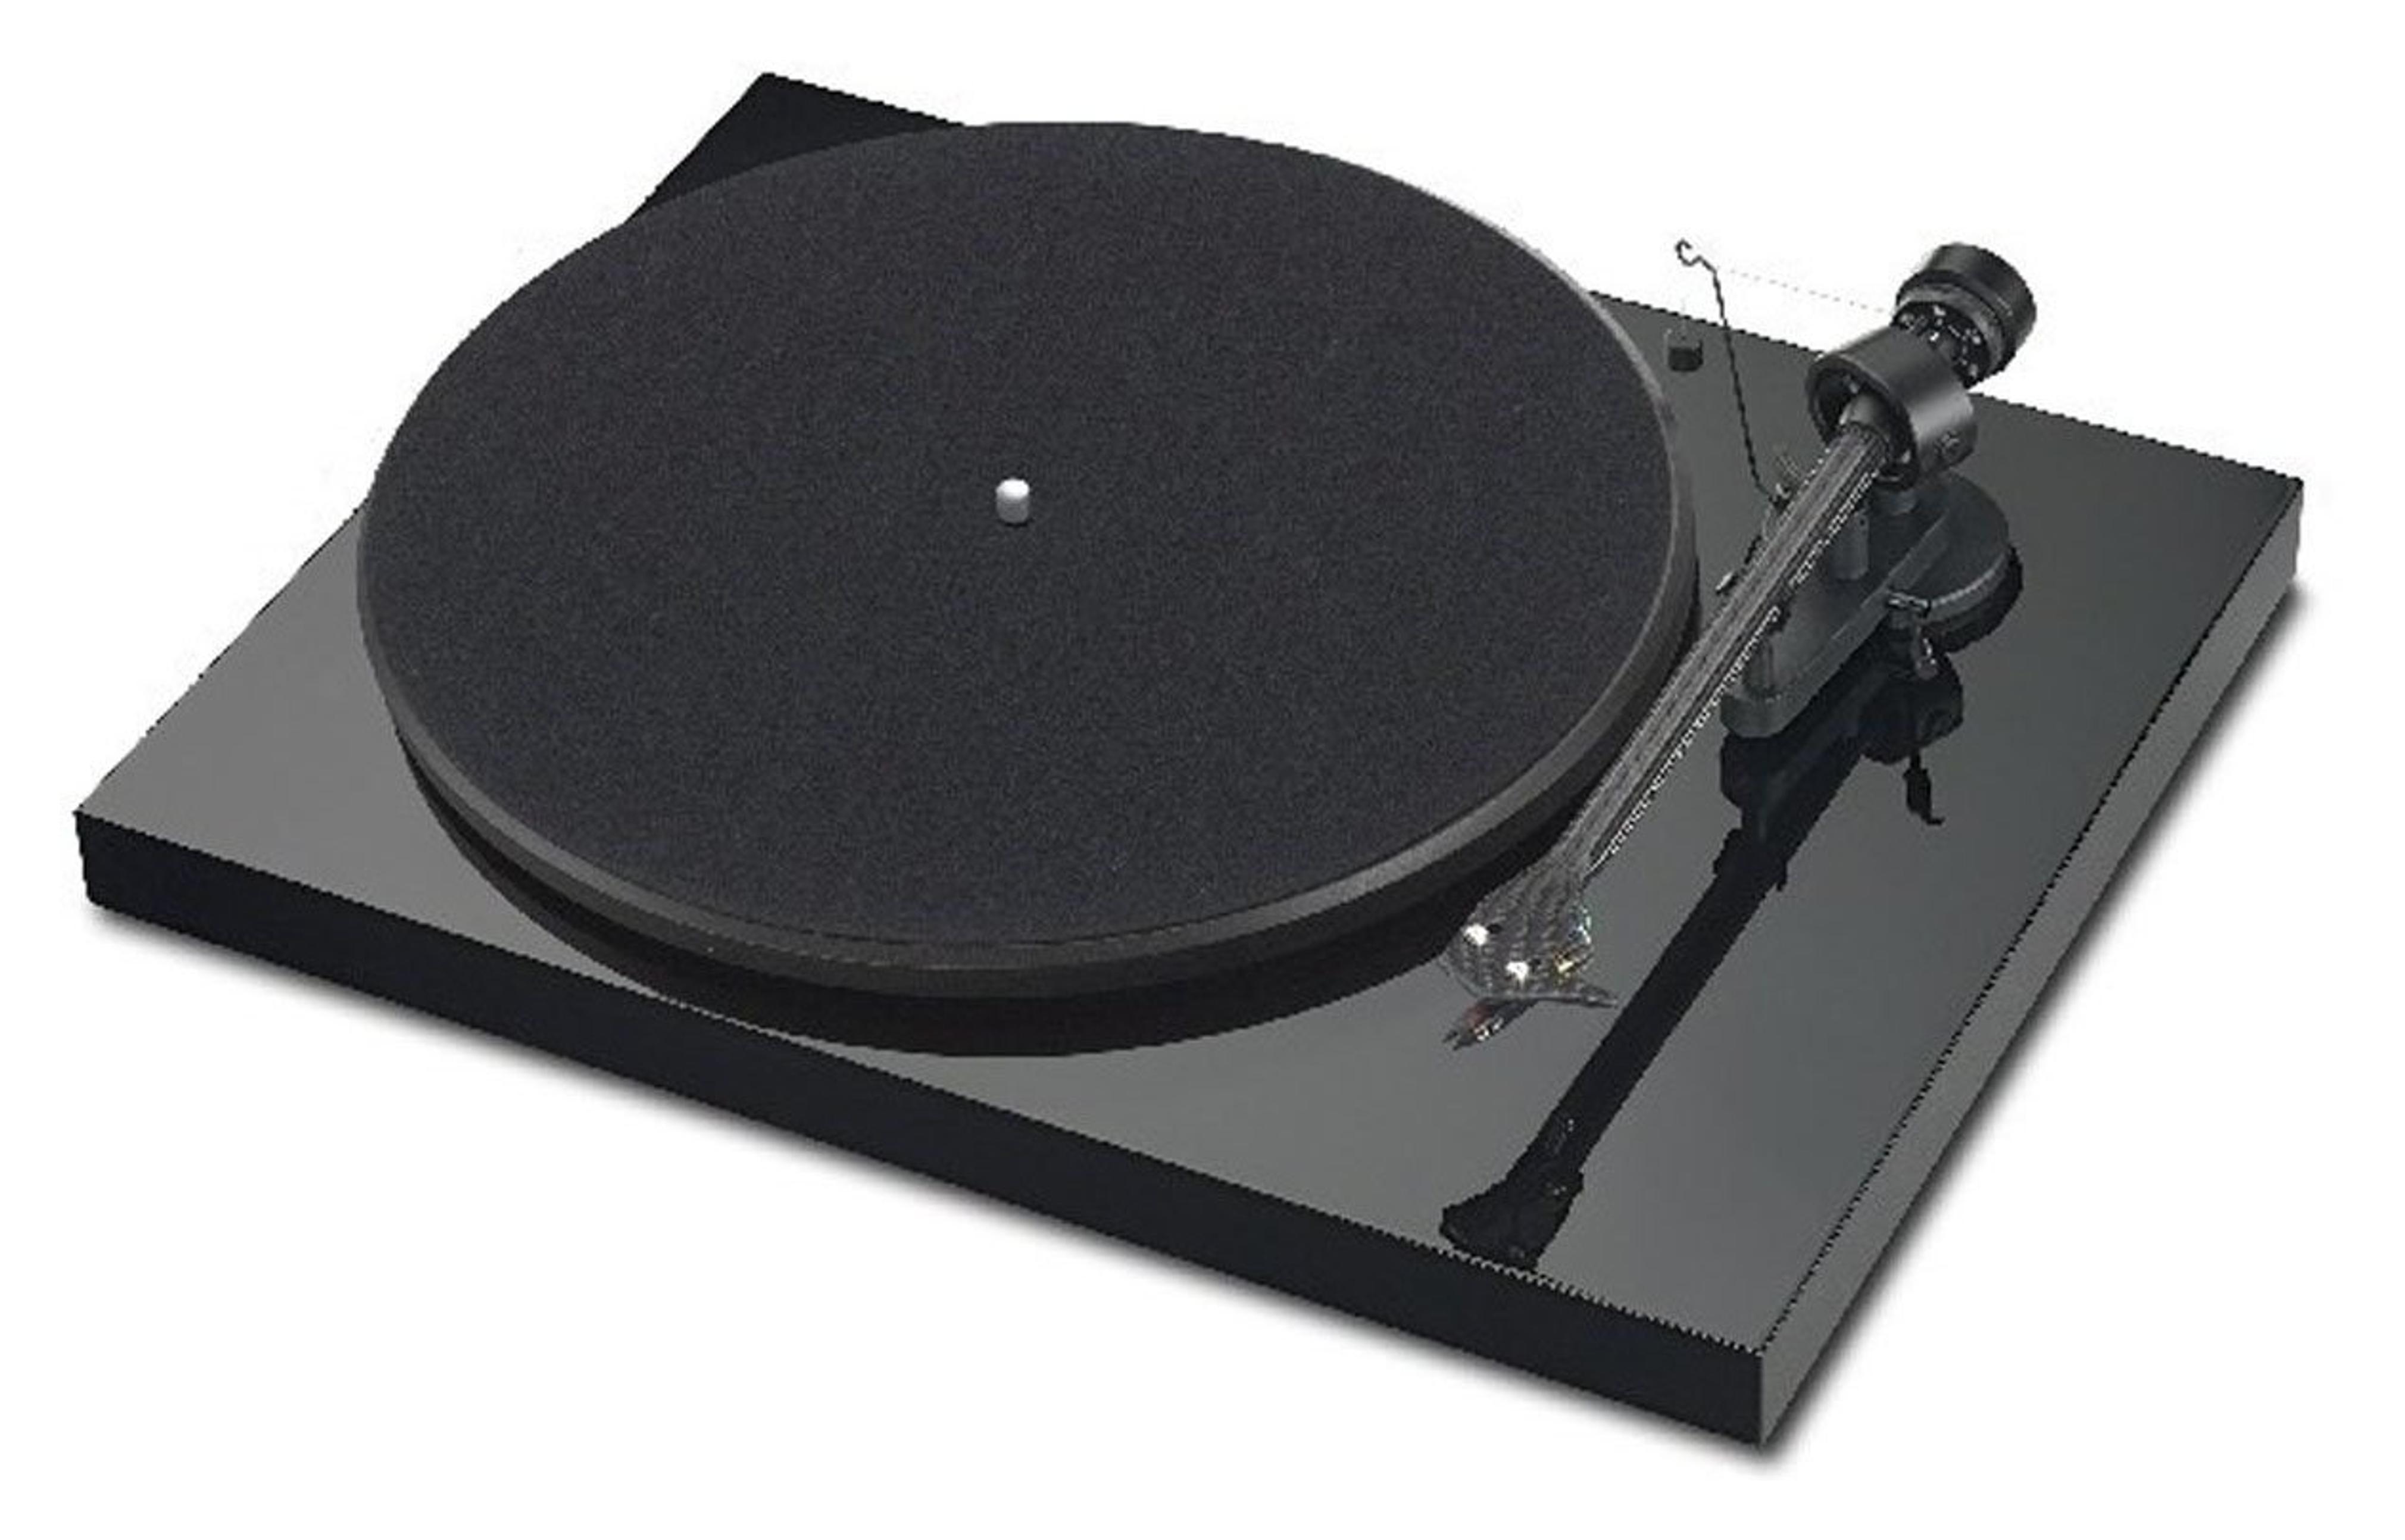 Pro-Ject Debut Carbon USB Turntable